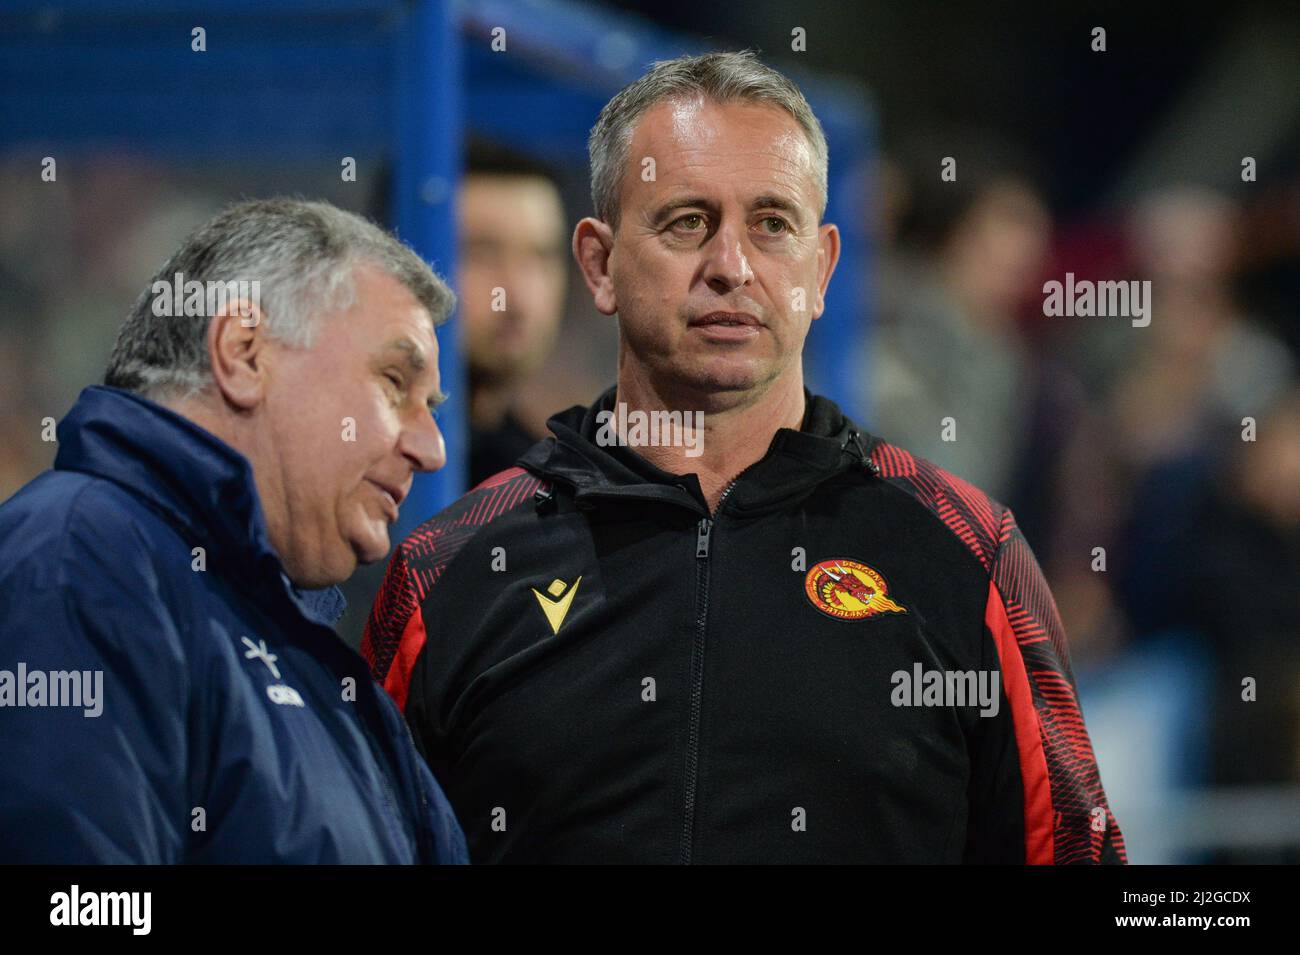 Huddersfield, England - 1st April 2022 -  Catalan Dragons’ coach Steve McNamara talks to Match Commissioner after late arrival.  Rugby League Betfred Super League  Huddersfield Giants vs Catalan Dragons at John Smith's Stadium, Huddersfield, UK  Dean Williams Credit: Dean Williams/Alamy Live News Stock Photo